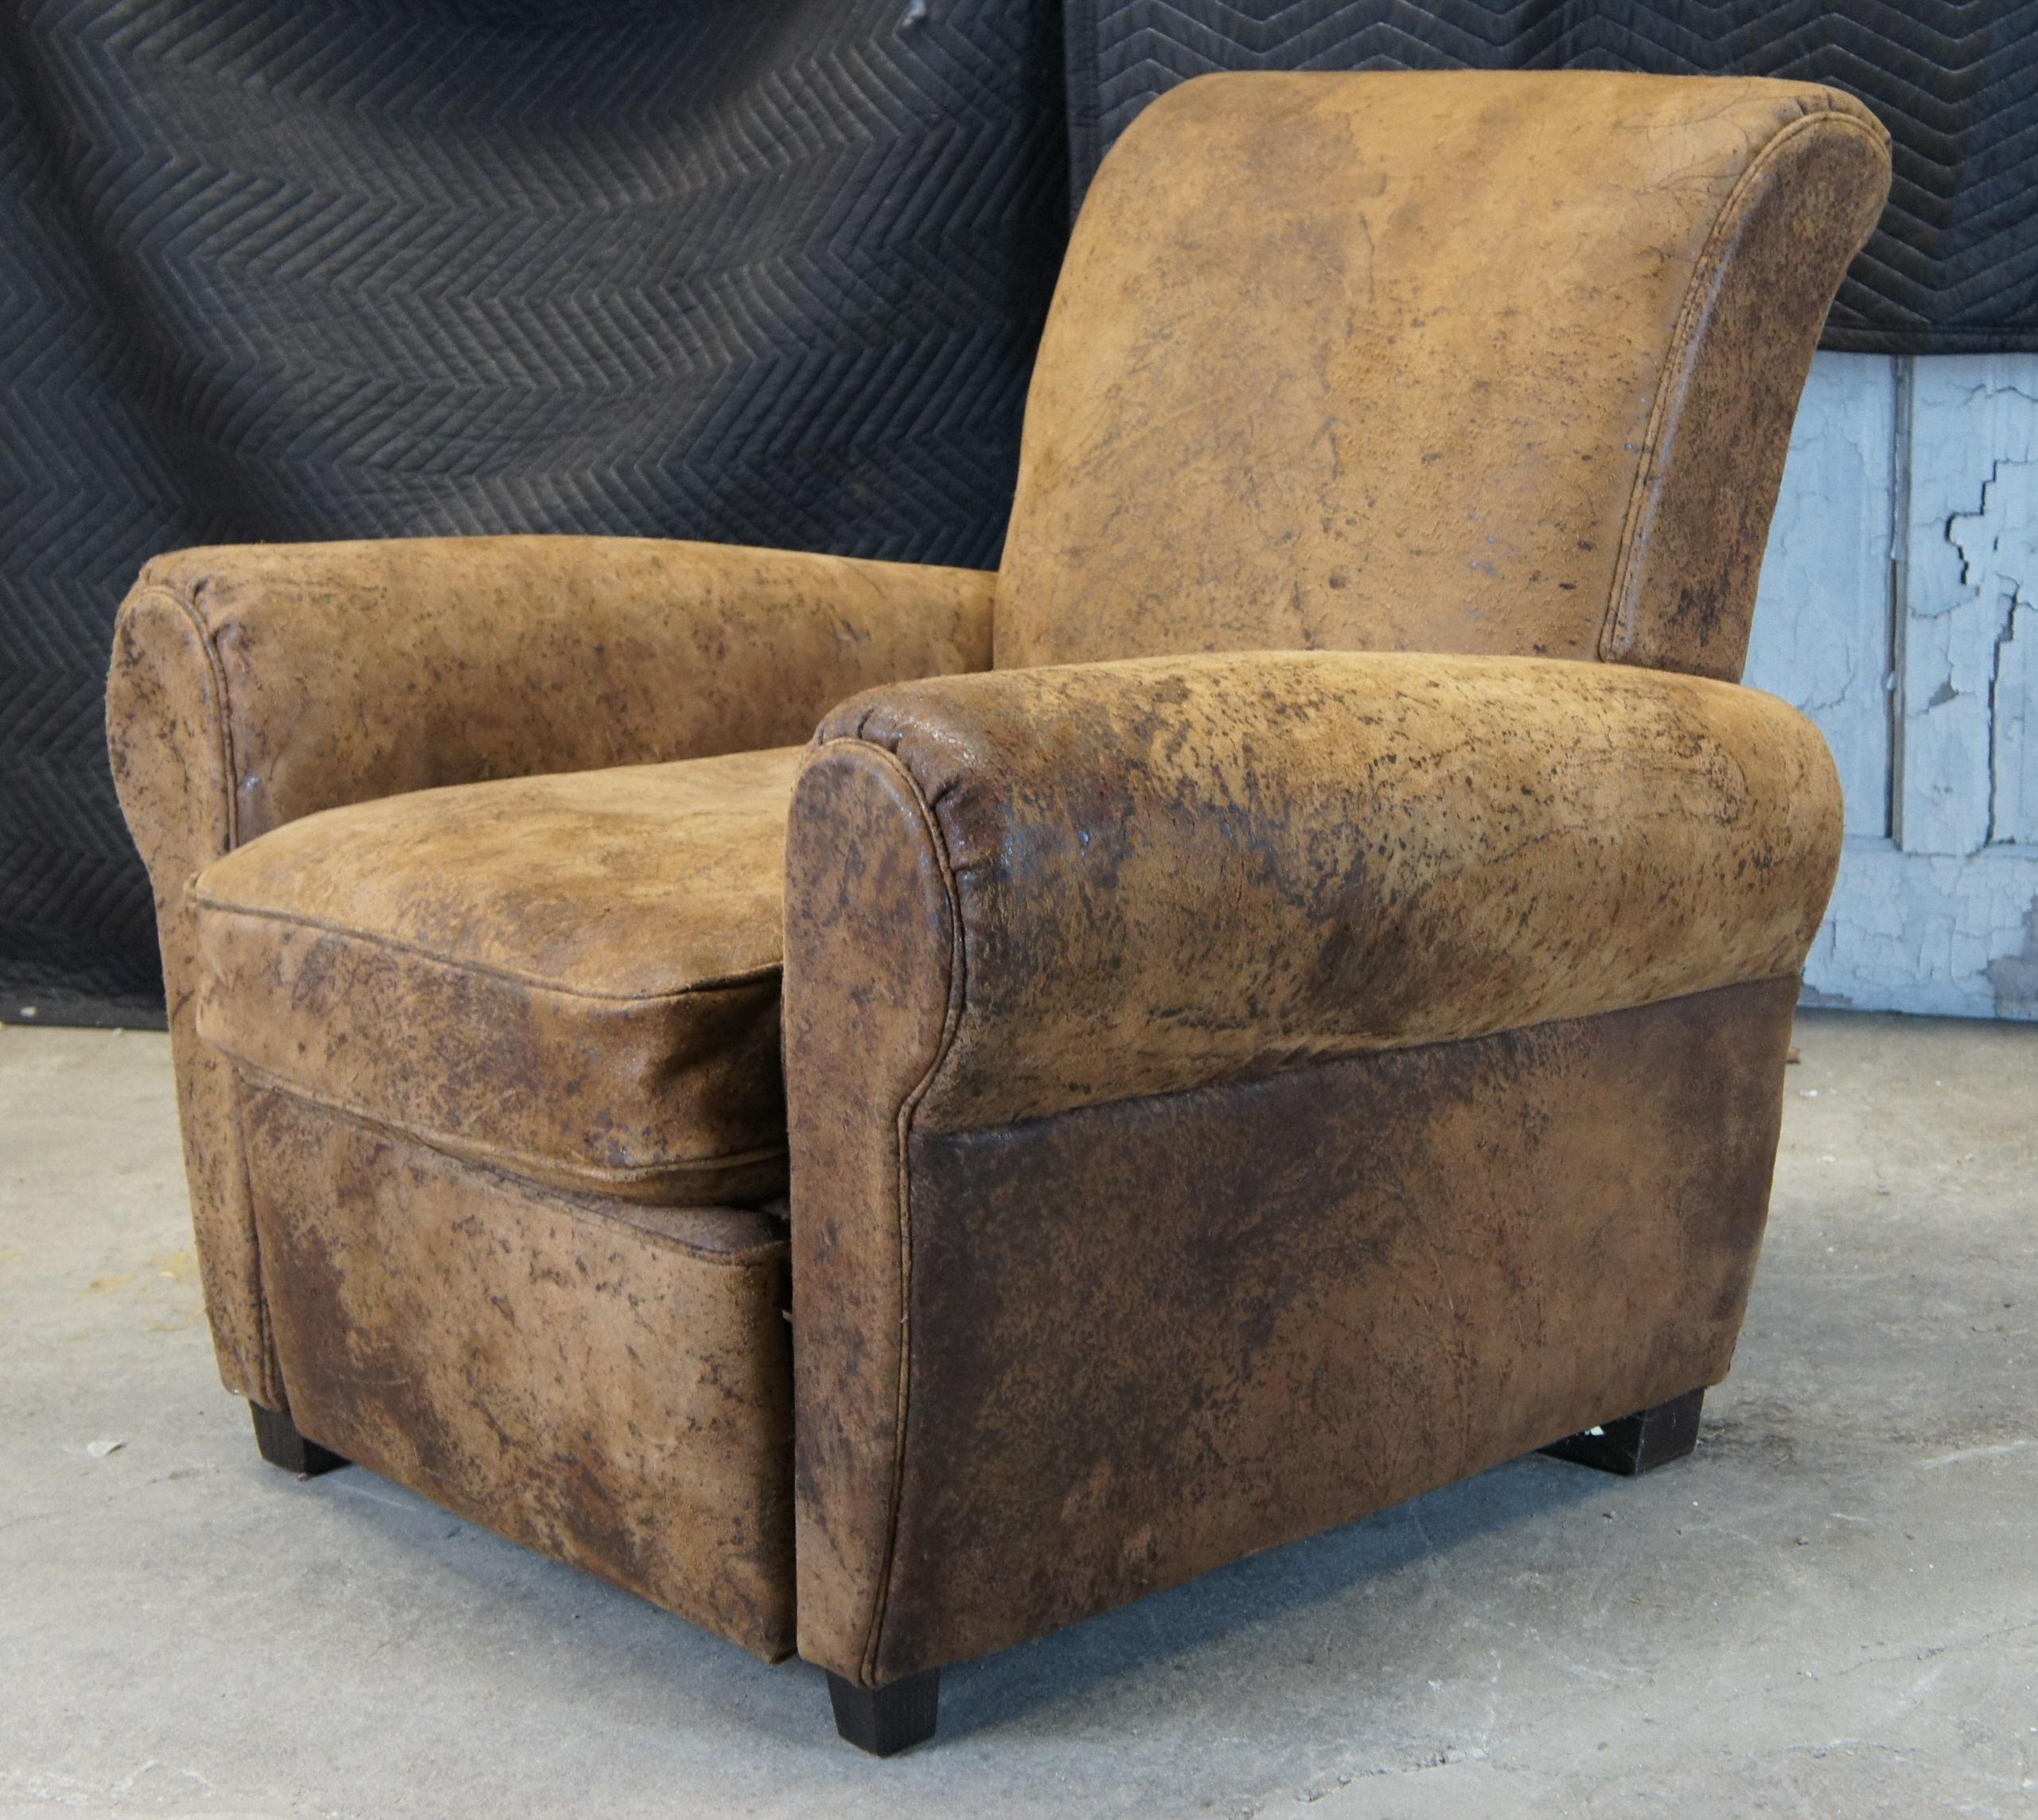 French Provincial Restoration Hardware 1920s French Parisian Distressed Leather Club Recliner RH